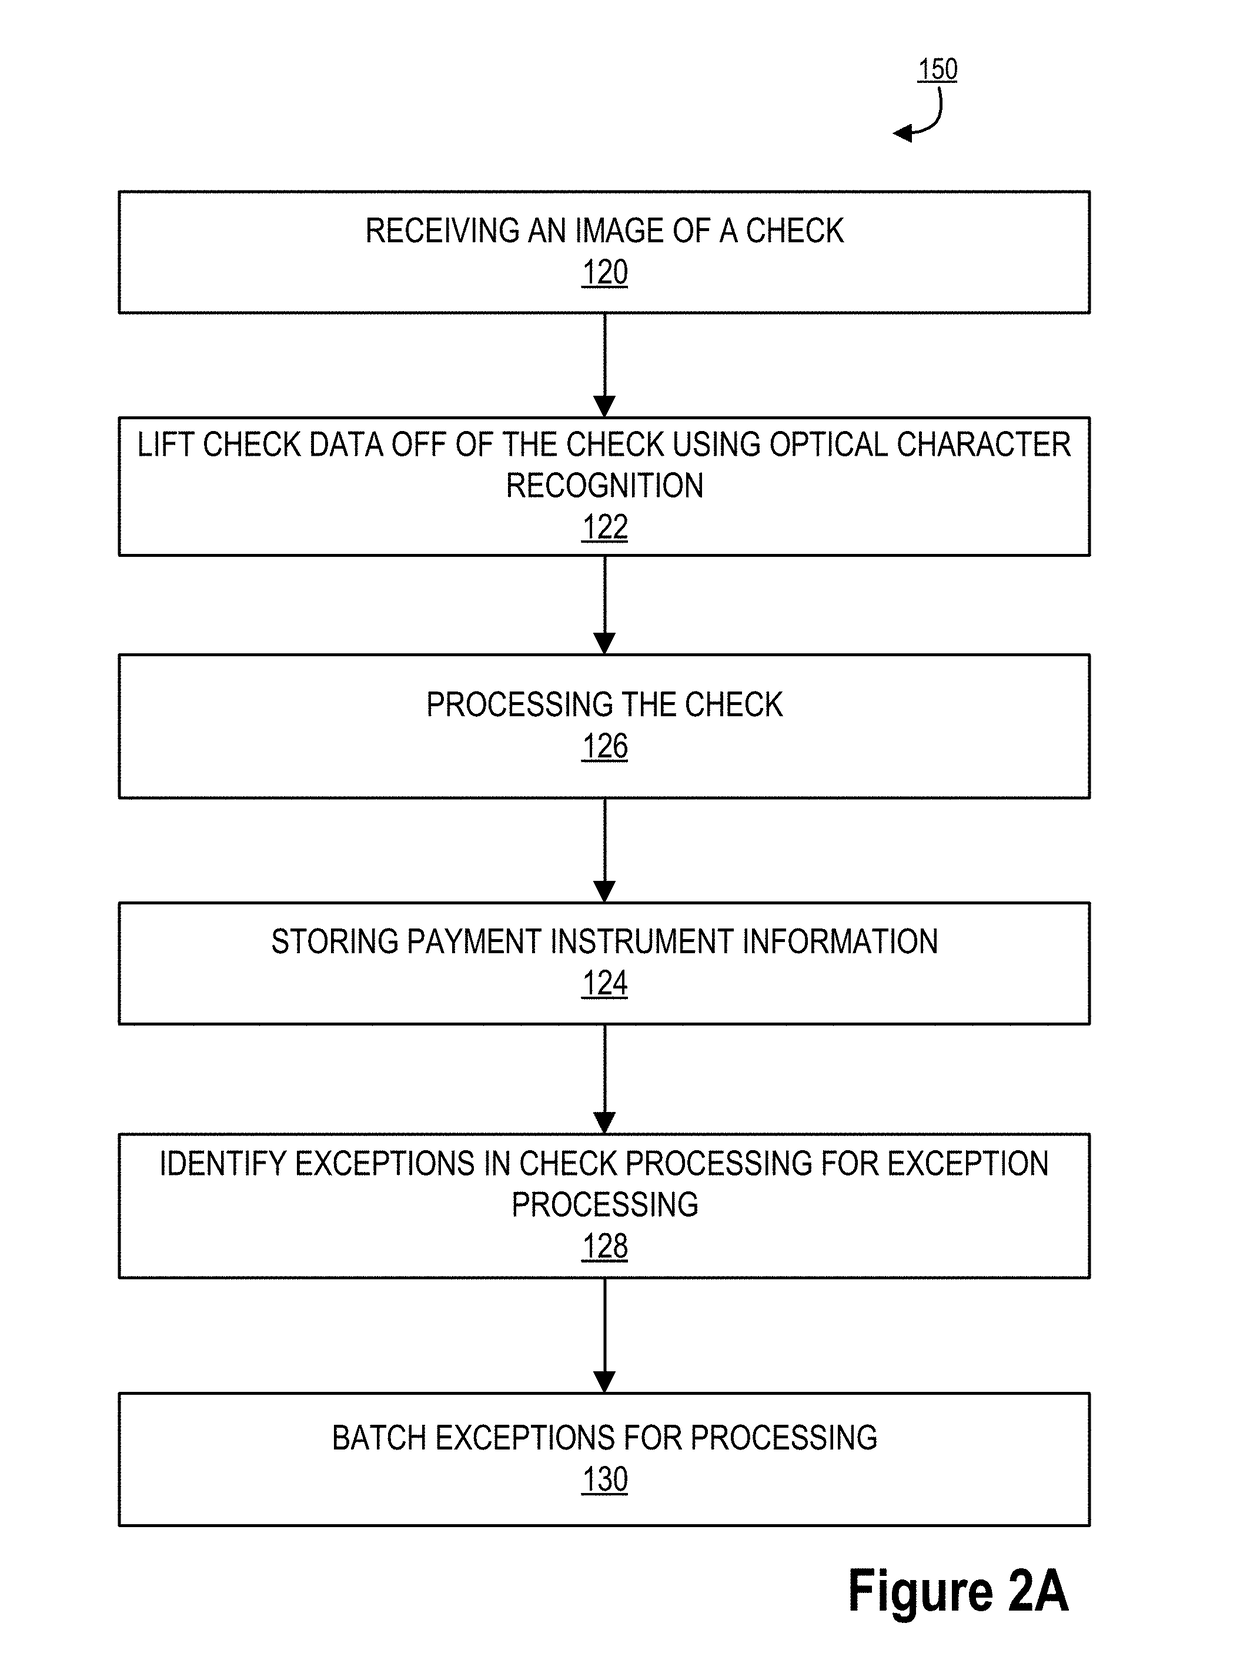 System for processing data using different processing channels based on source error probability